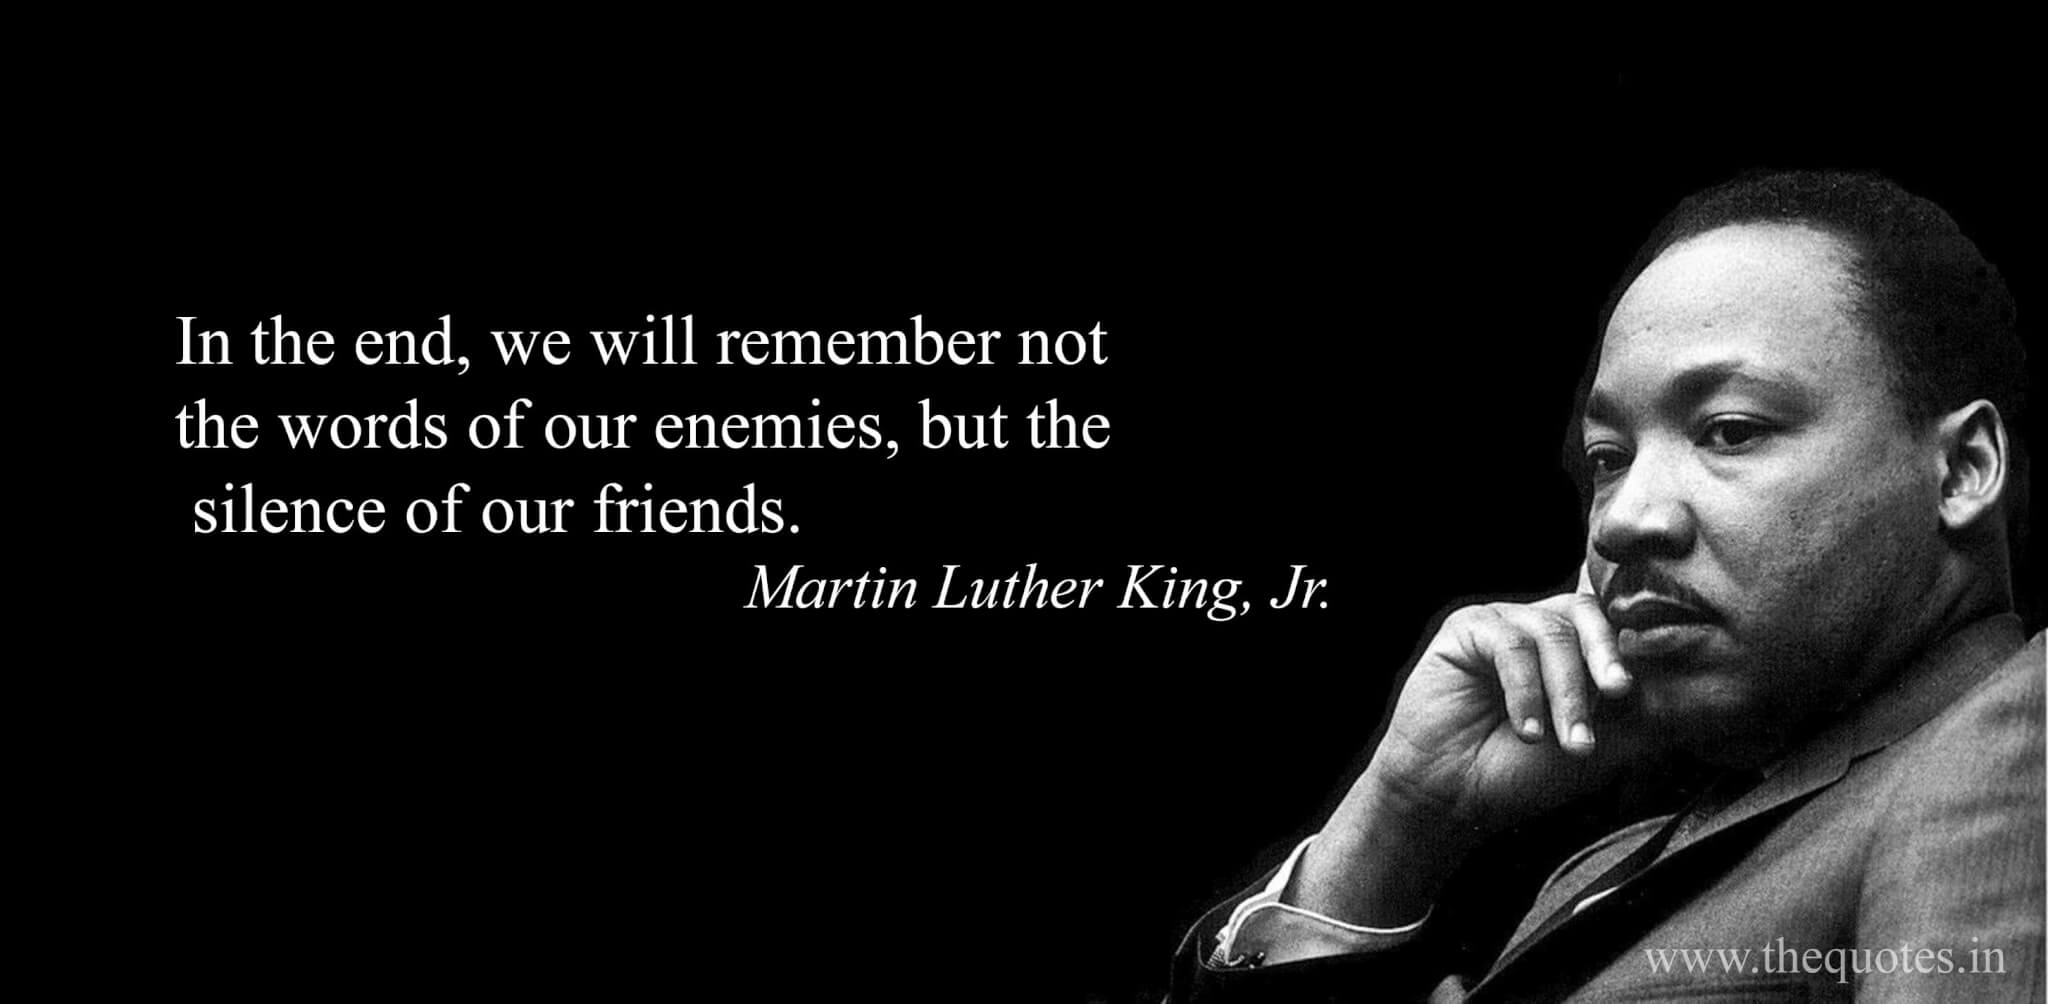 Martin Luther King Jr Silence Intolerance Quote